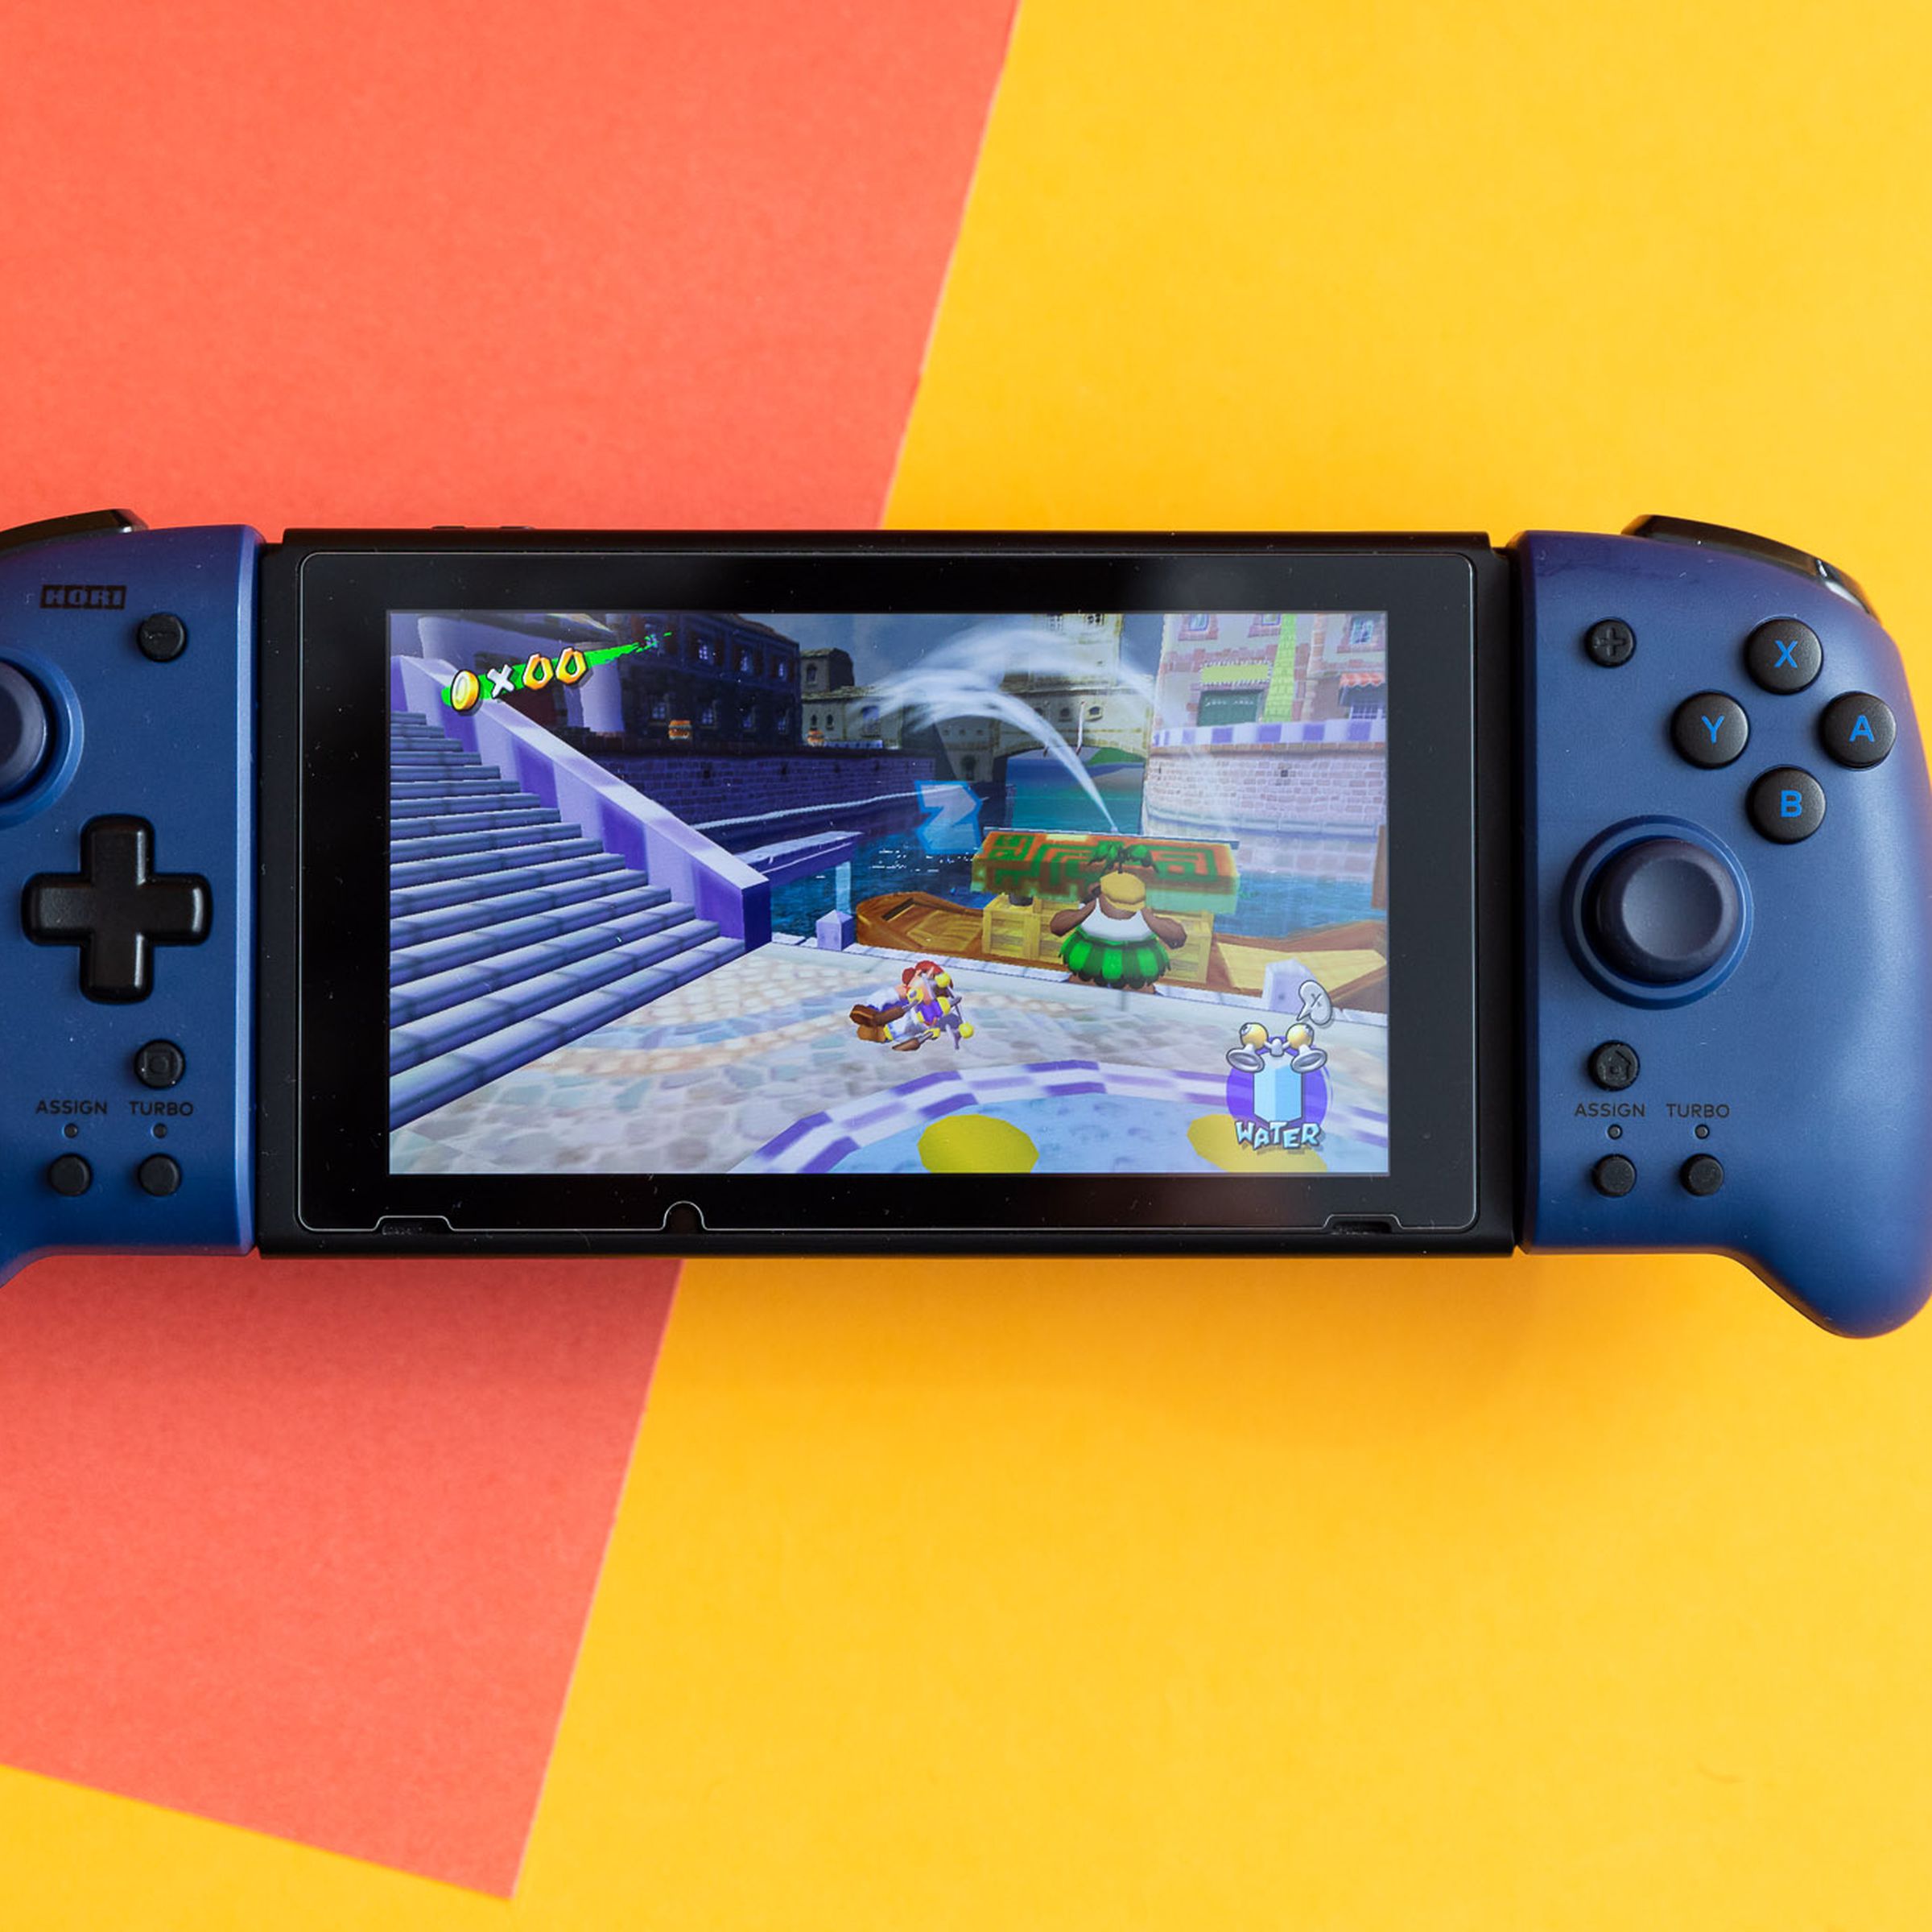 Hori’s Split Pad Pro are connected to a Nintendo Switch that is displaying Super Mario Sunshine.